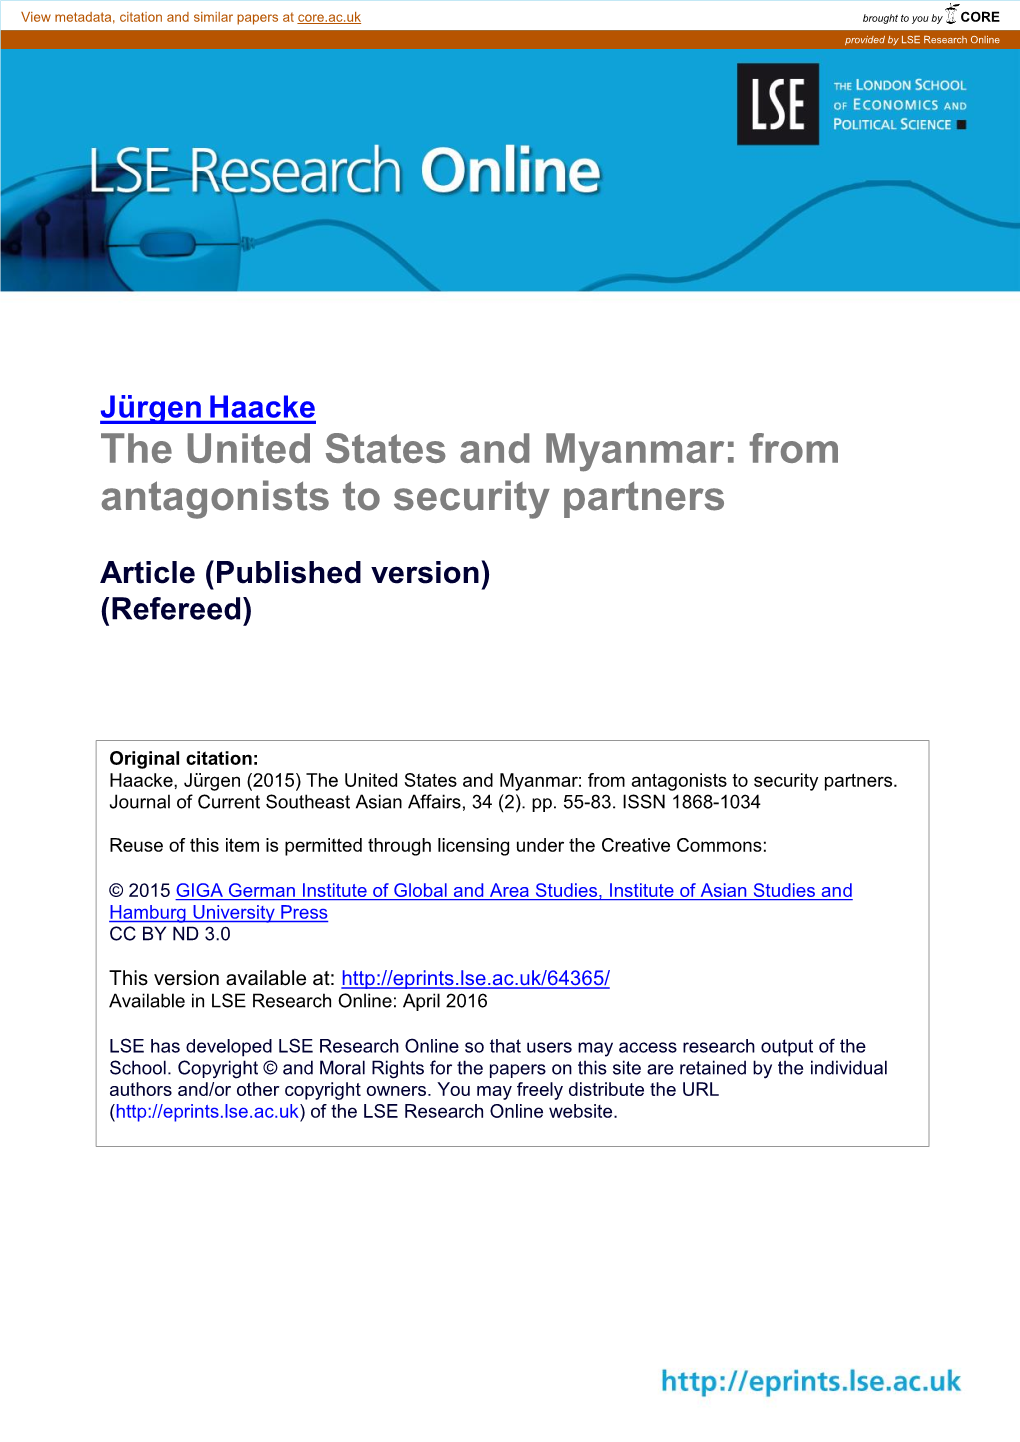 The United States and Myanmar: from Antagonists to Security Partners